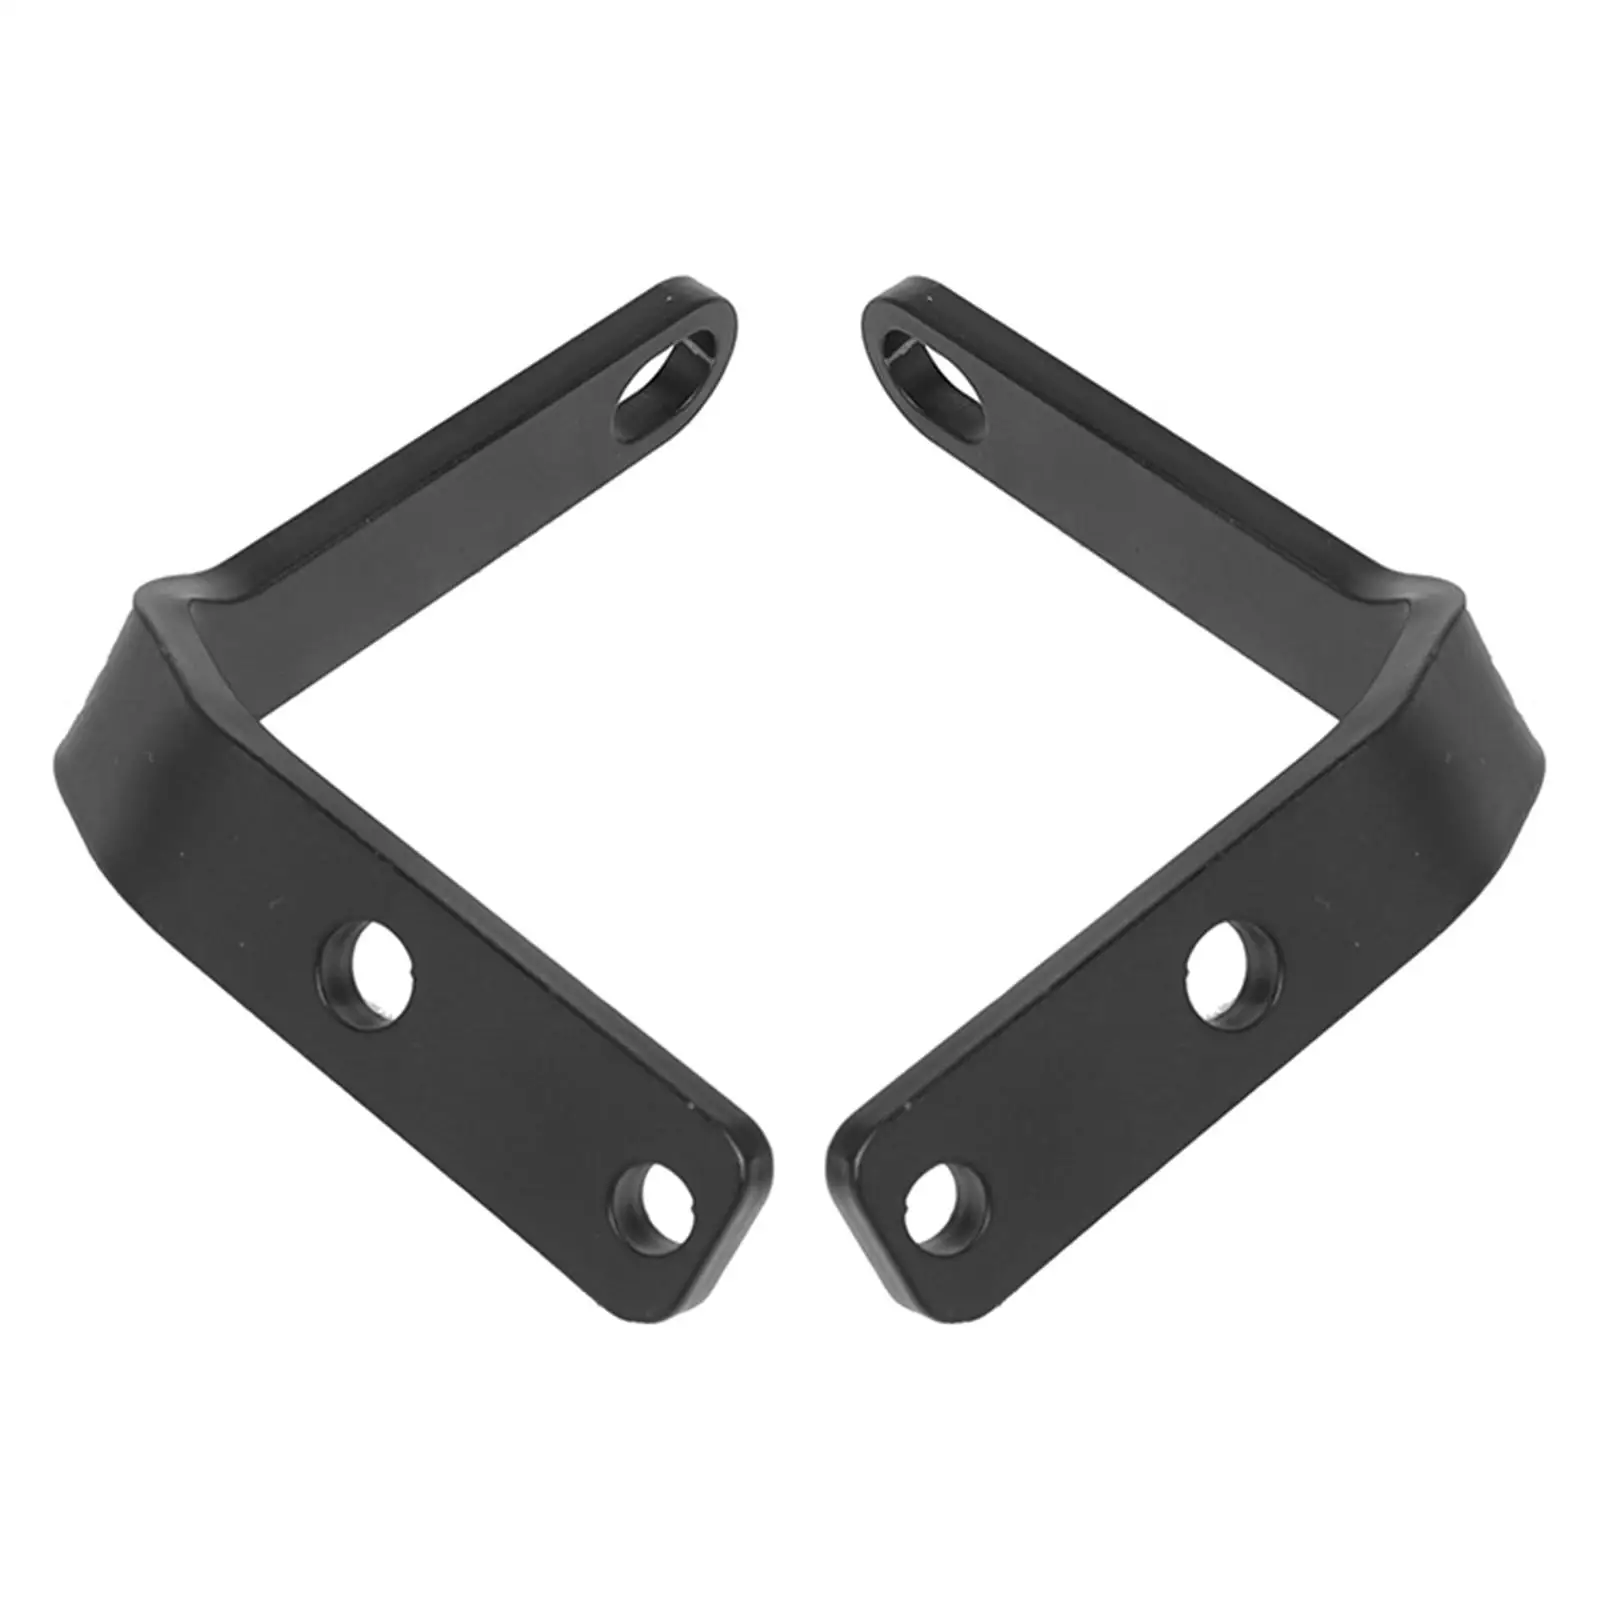 2 Pieces Handlebar Rear View Side Mirror Bracket Motorcycle for